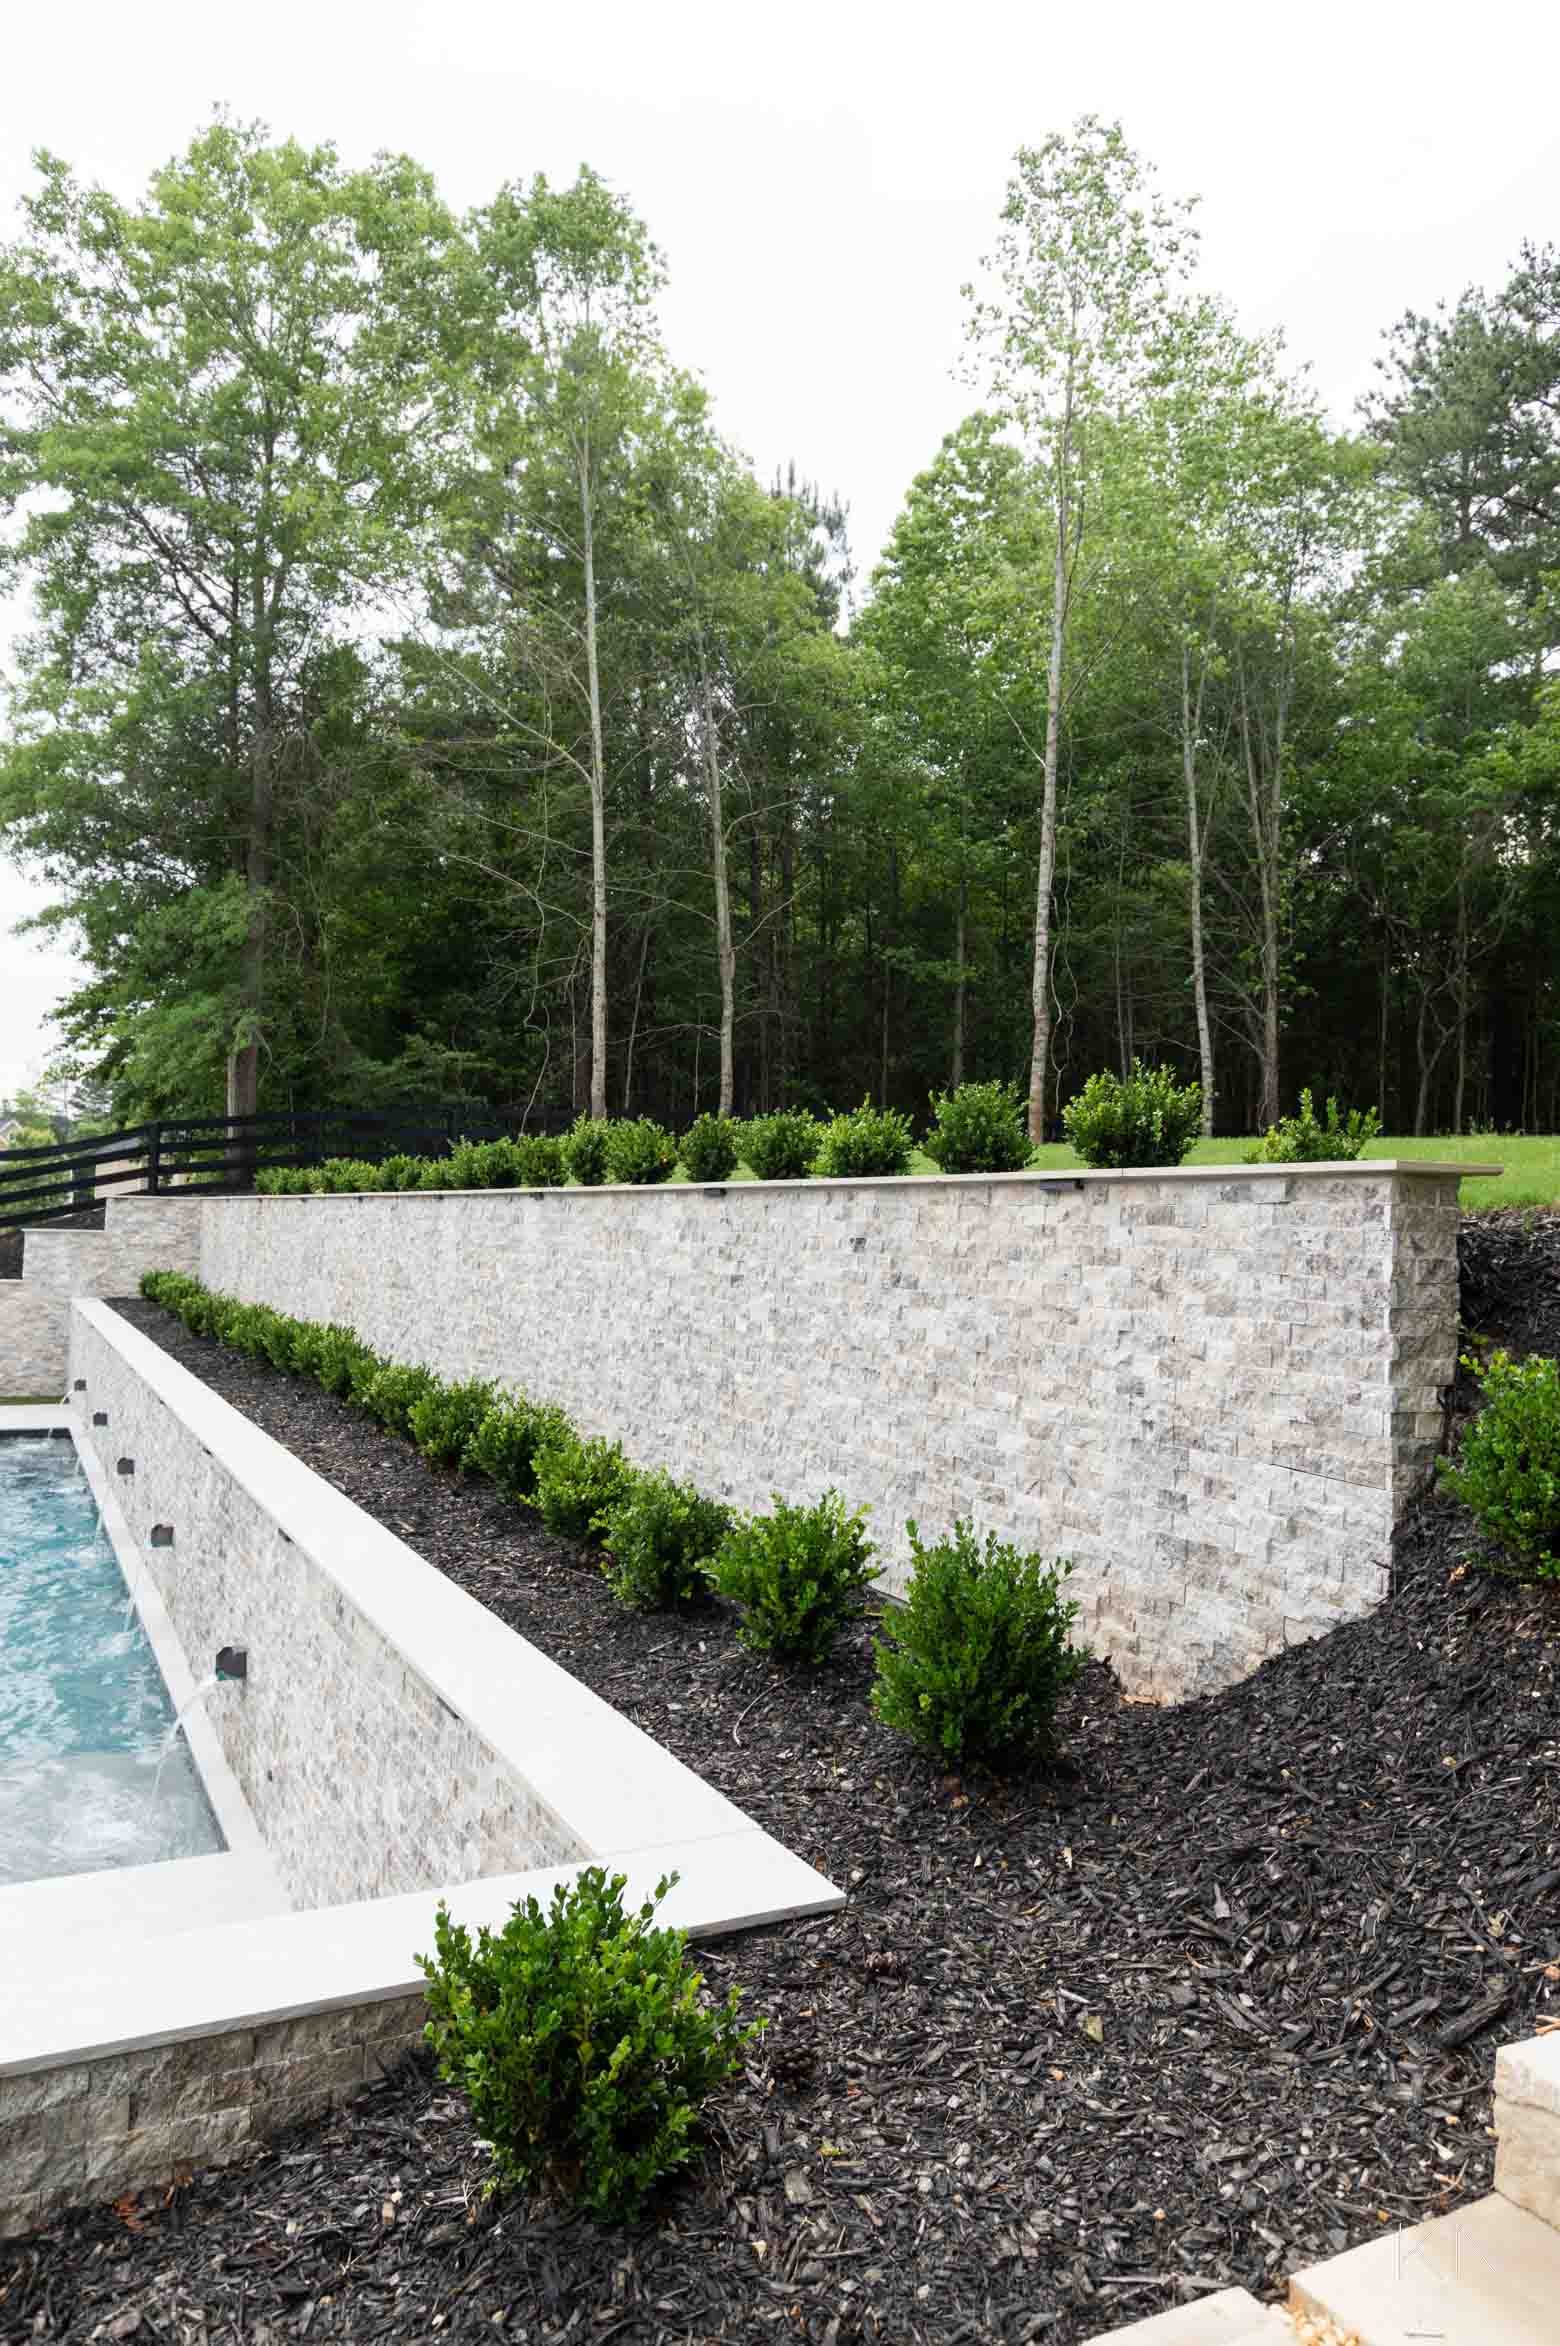 Two Retaining Walls Design with Two Rows of Boxwood